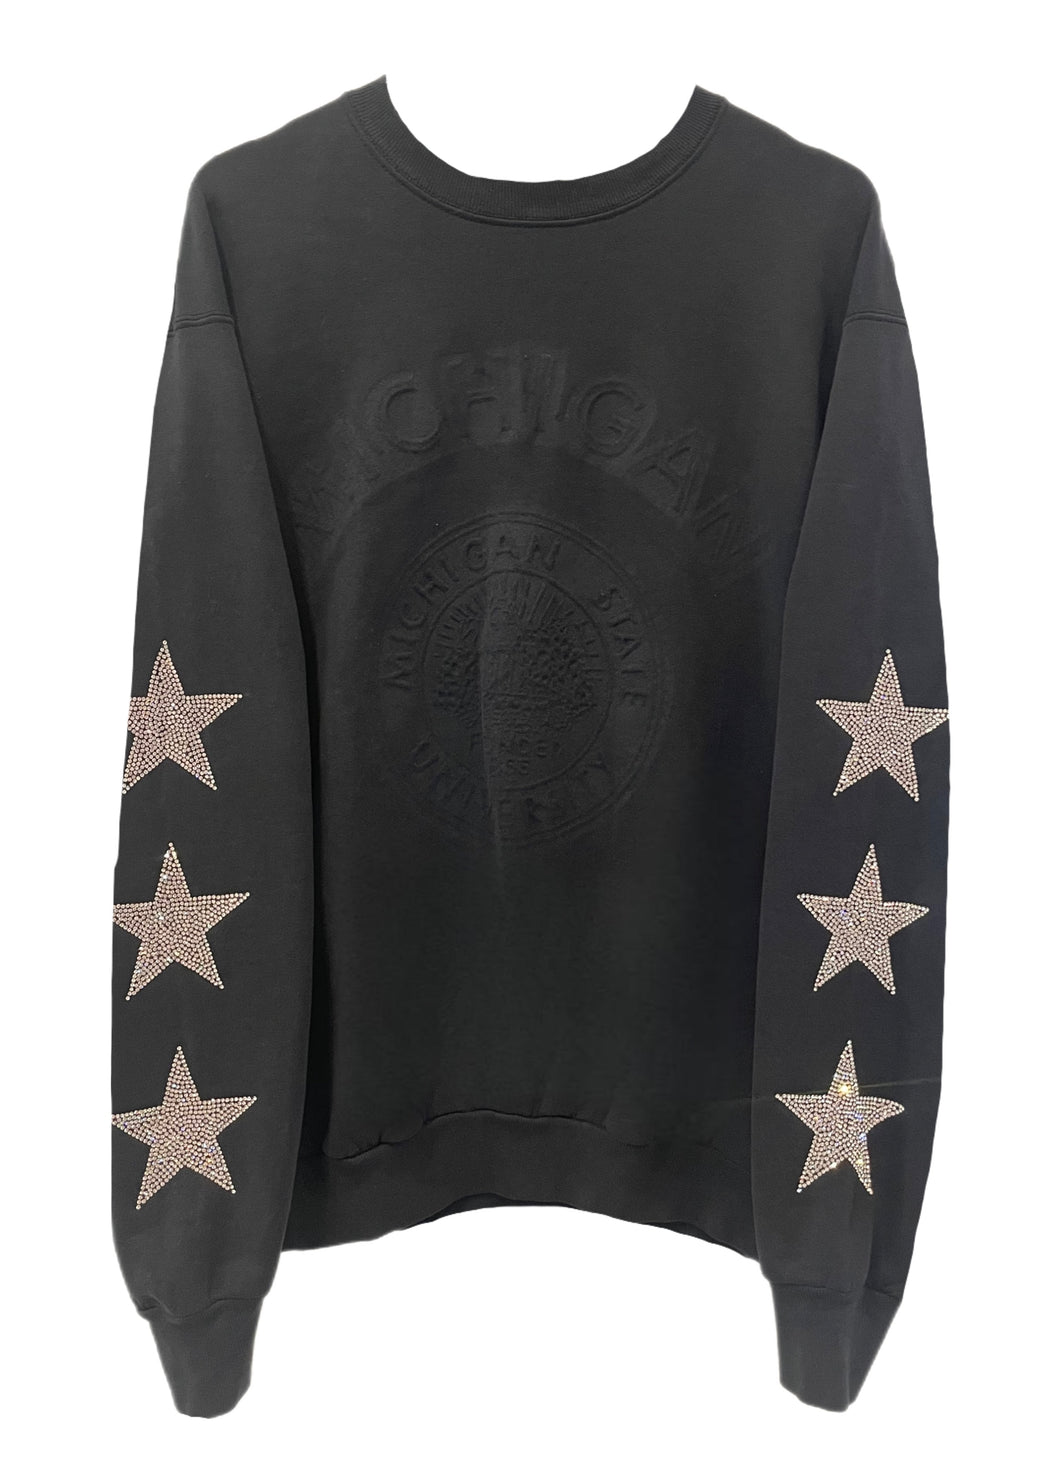 Michigan State University, One of a KIND Vintage Sweatshirt with Three Crystal Star Design